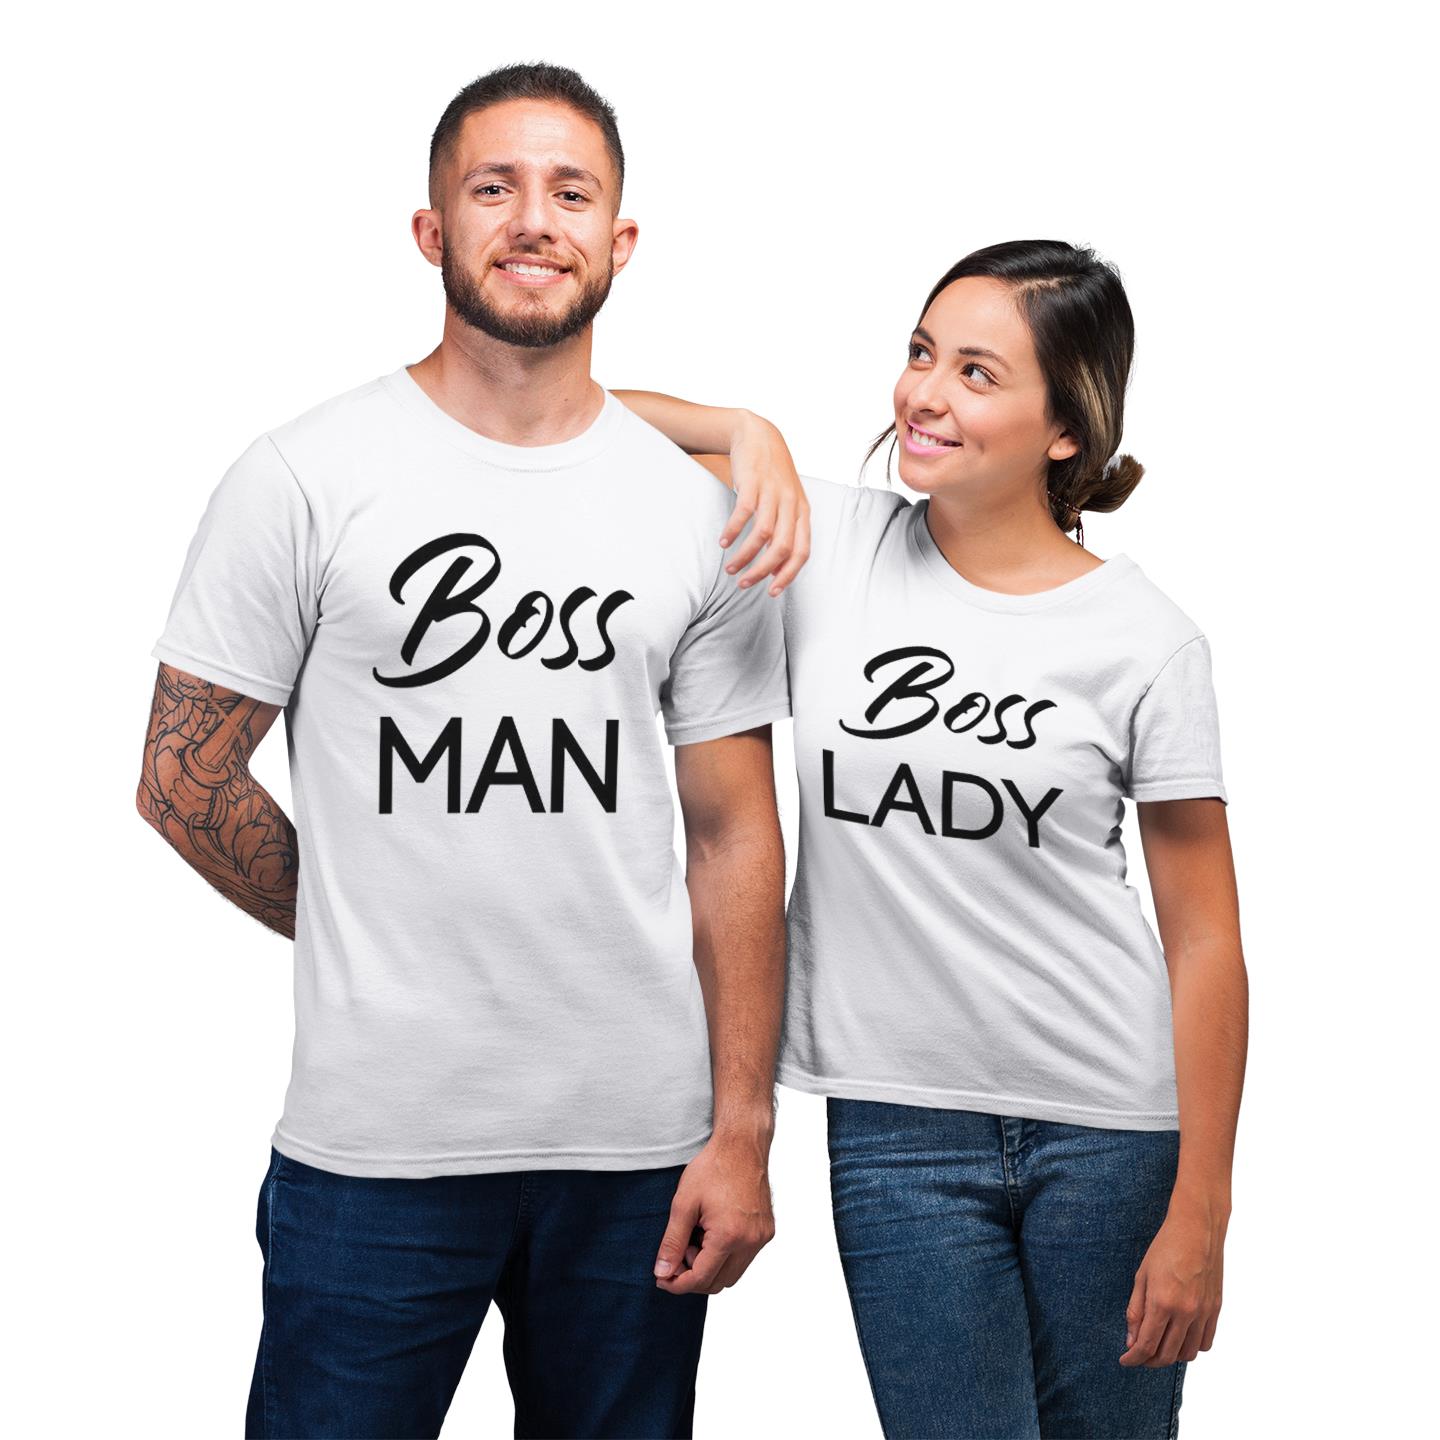 Boss Man Lady Shirt For Couple Matching His And Hers T-shirt